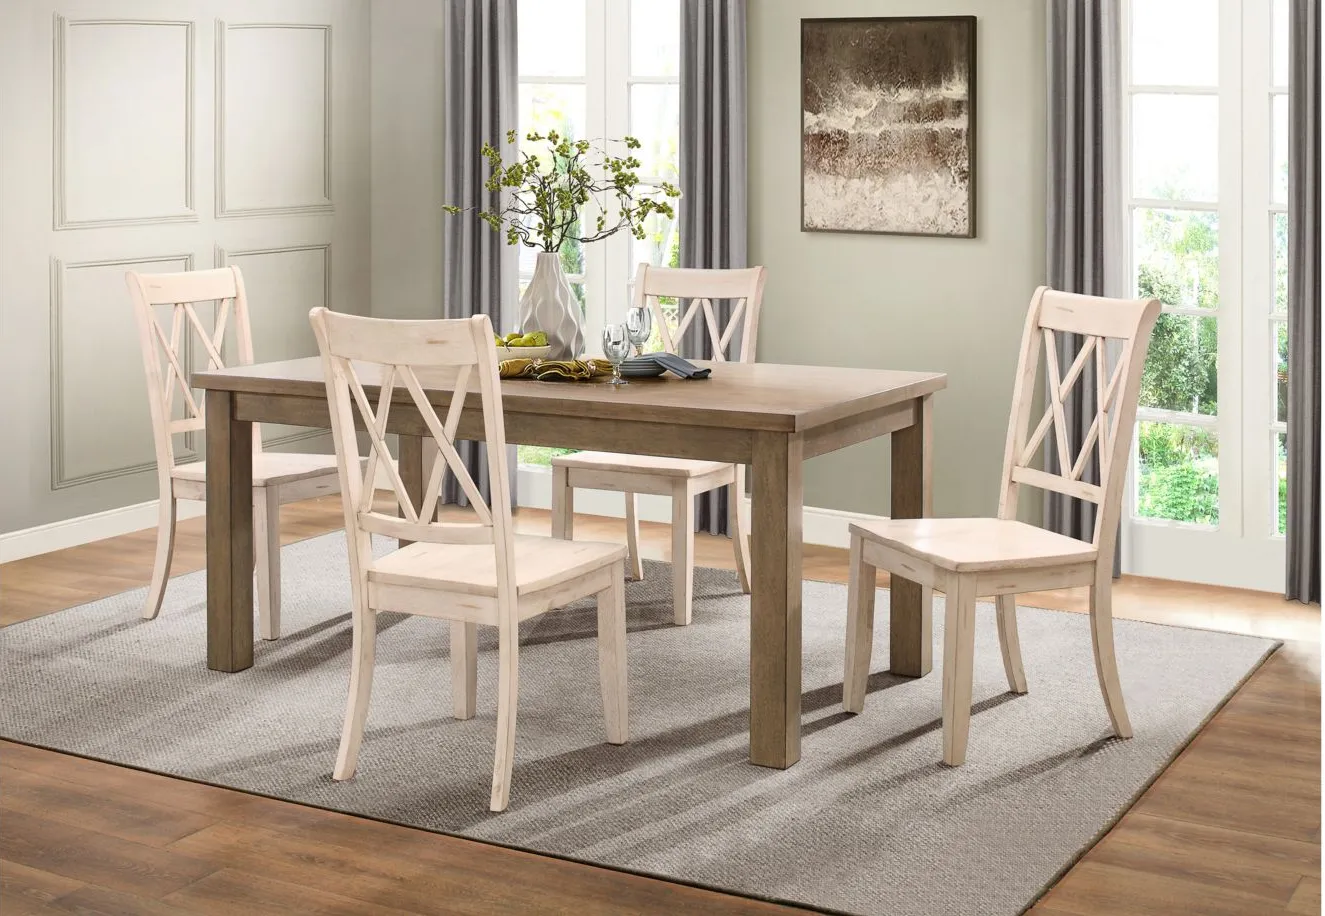 Salena 5-pc Dining Set in Natural & White by Homelegance